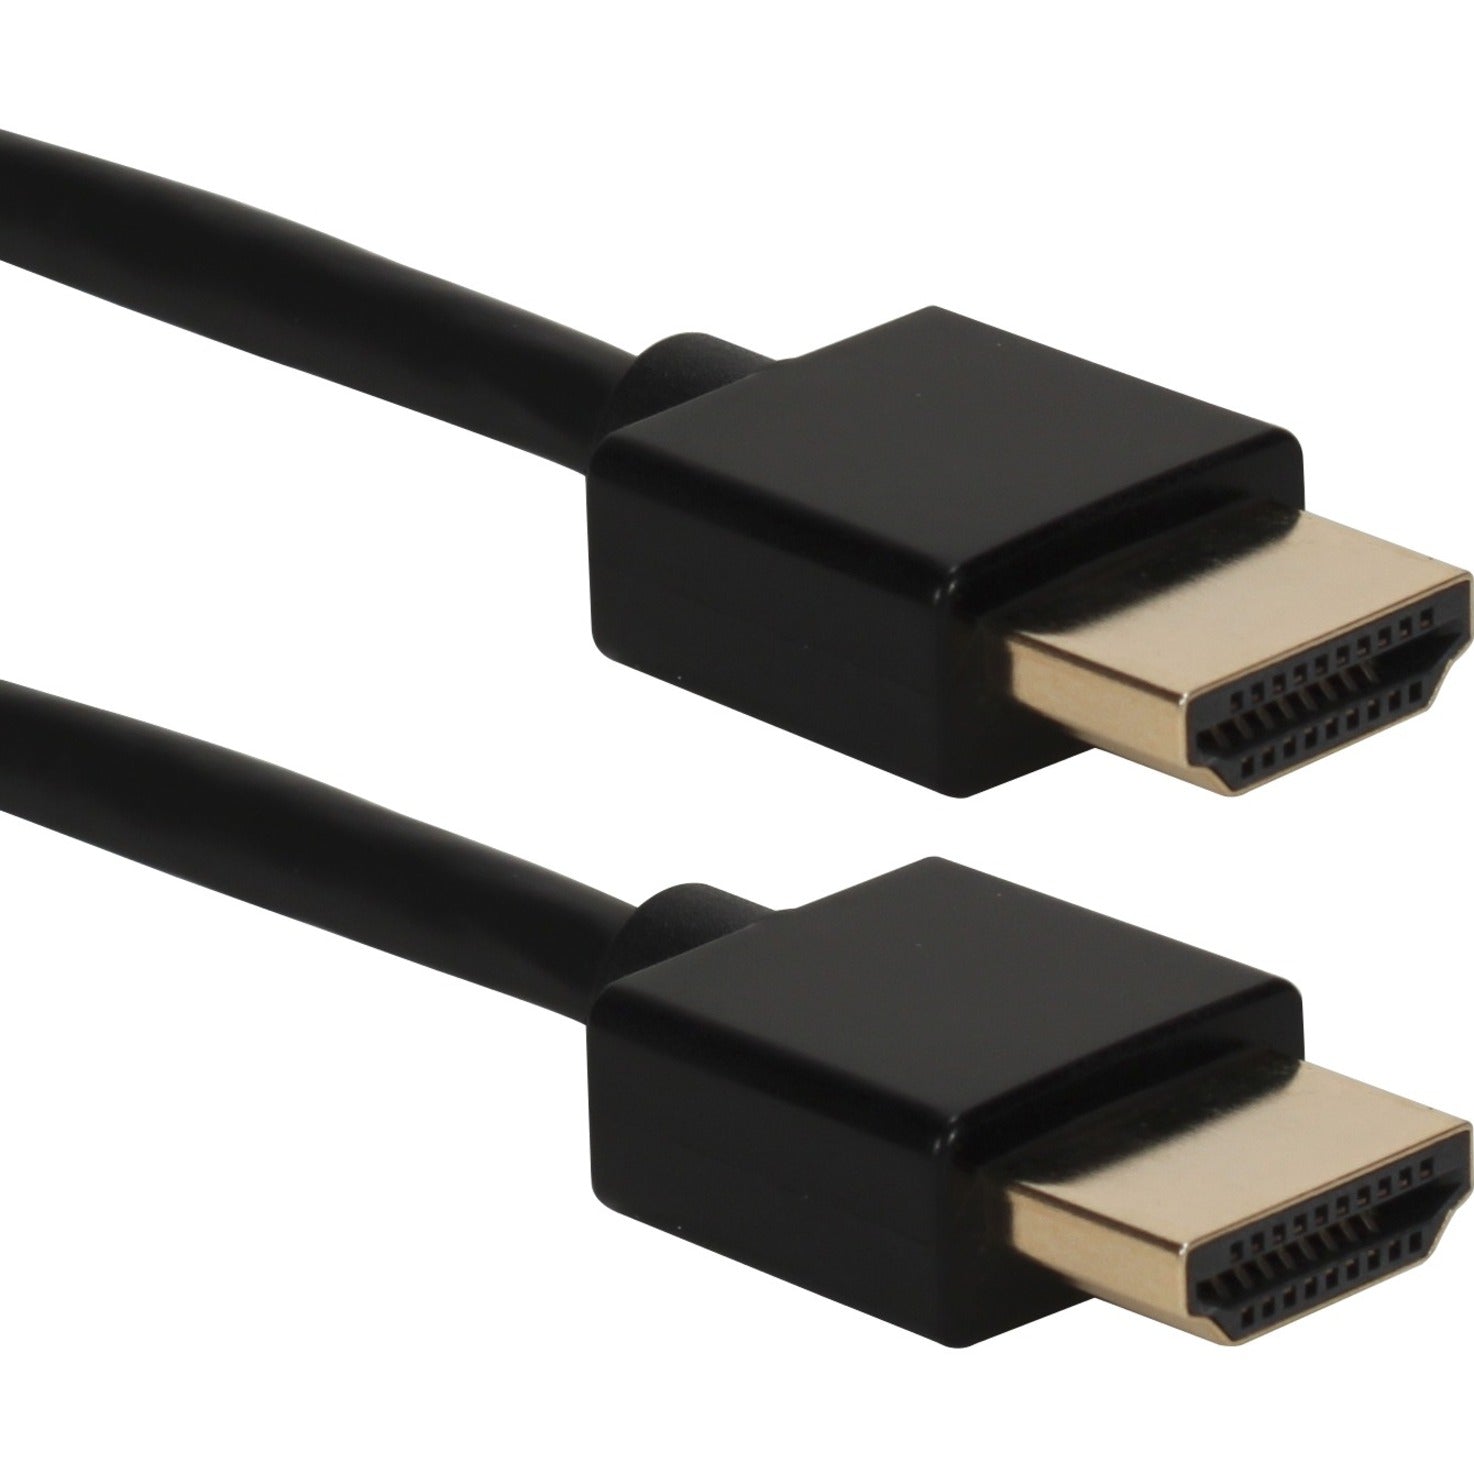 QVS HDT-3F 3ft High Speed HDMI UltraHD 4K with Ethernet Thin Flexible Cable, Corrosion Resistant, Gold Plated